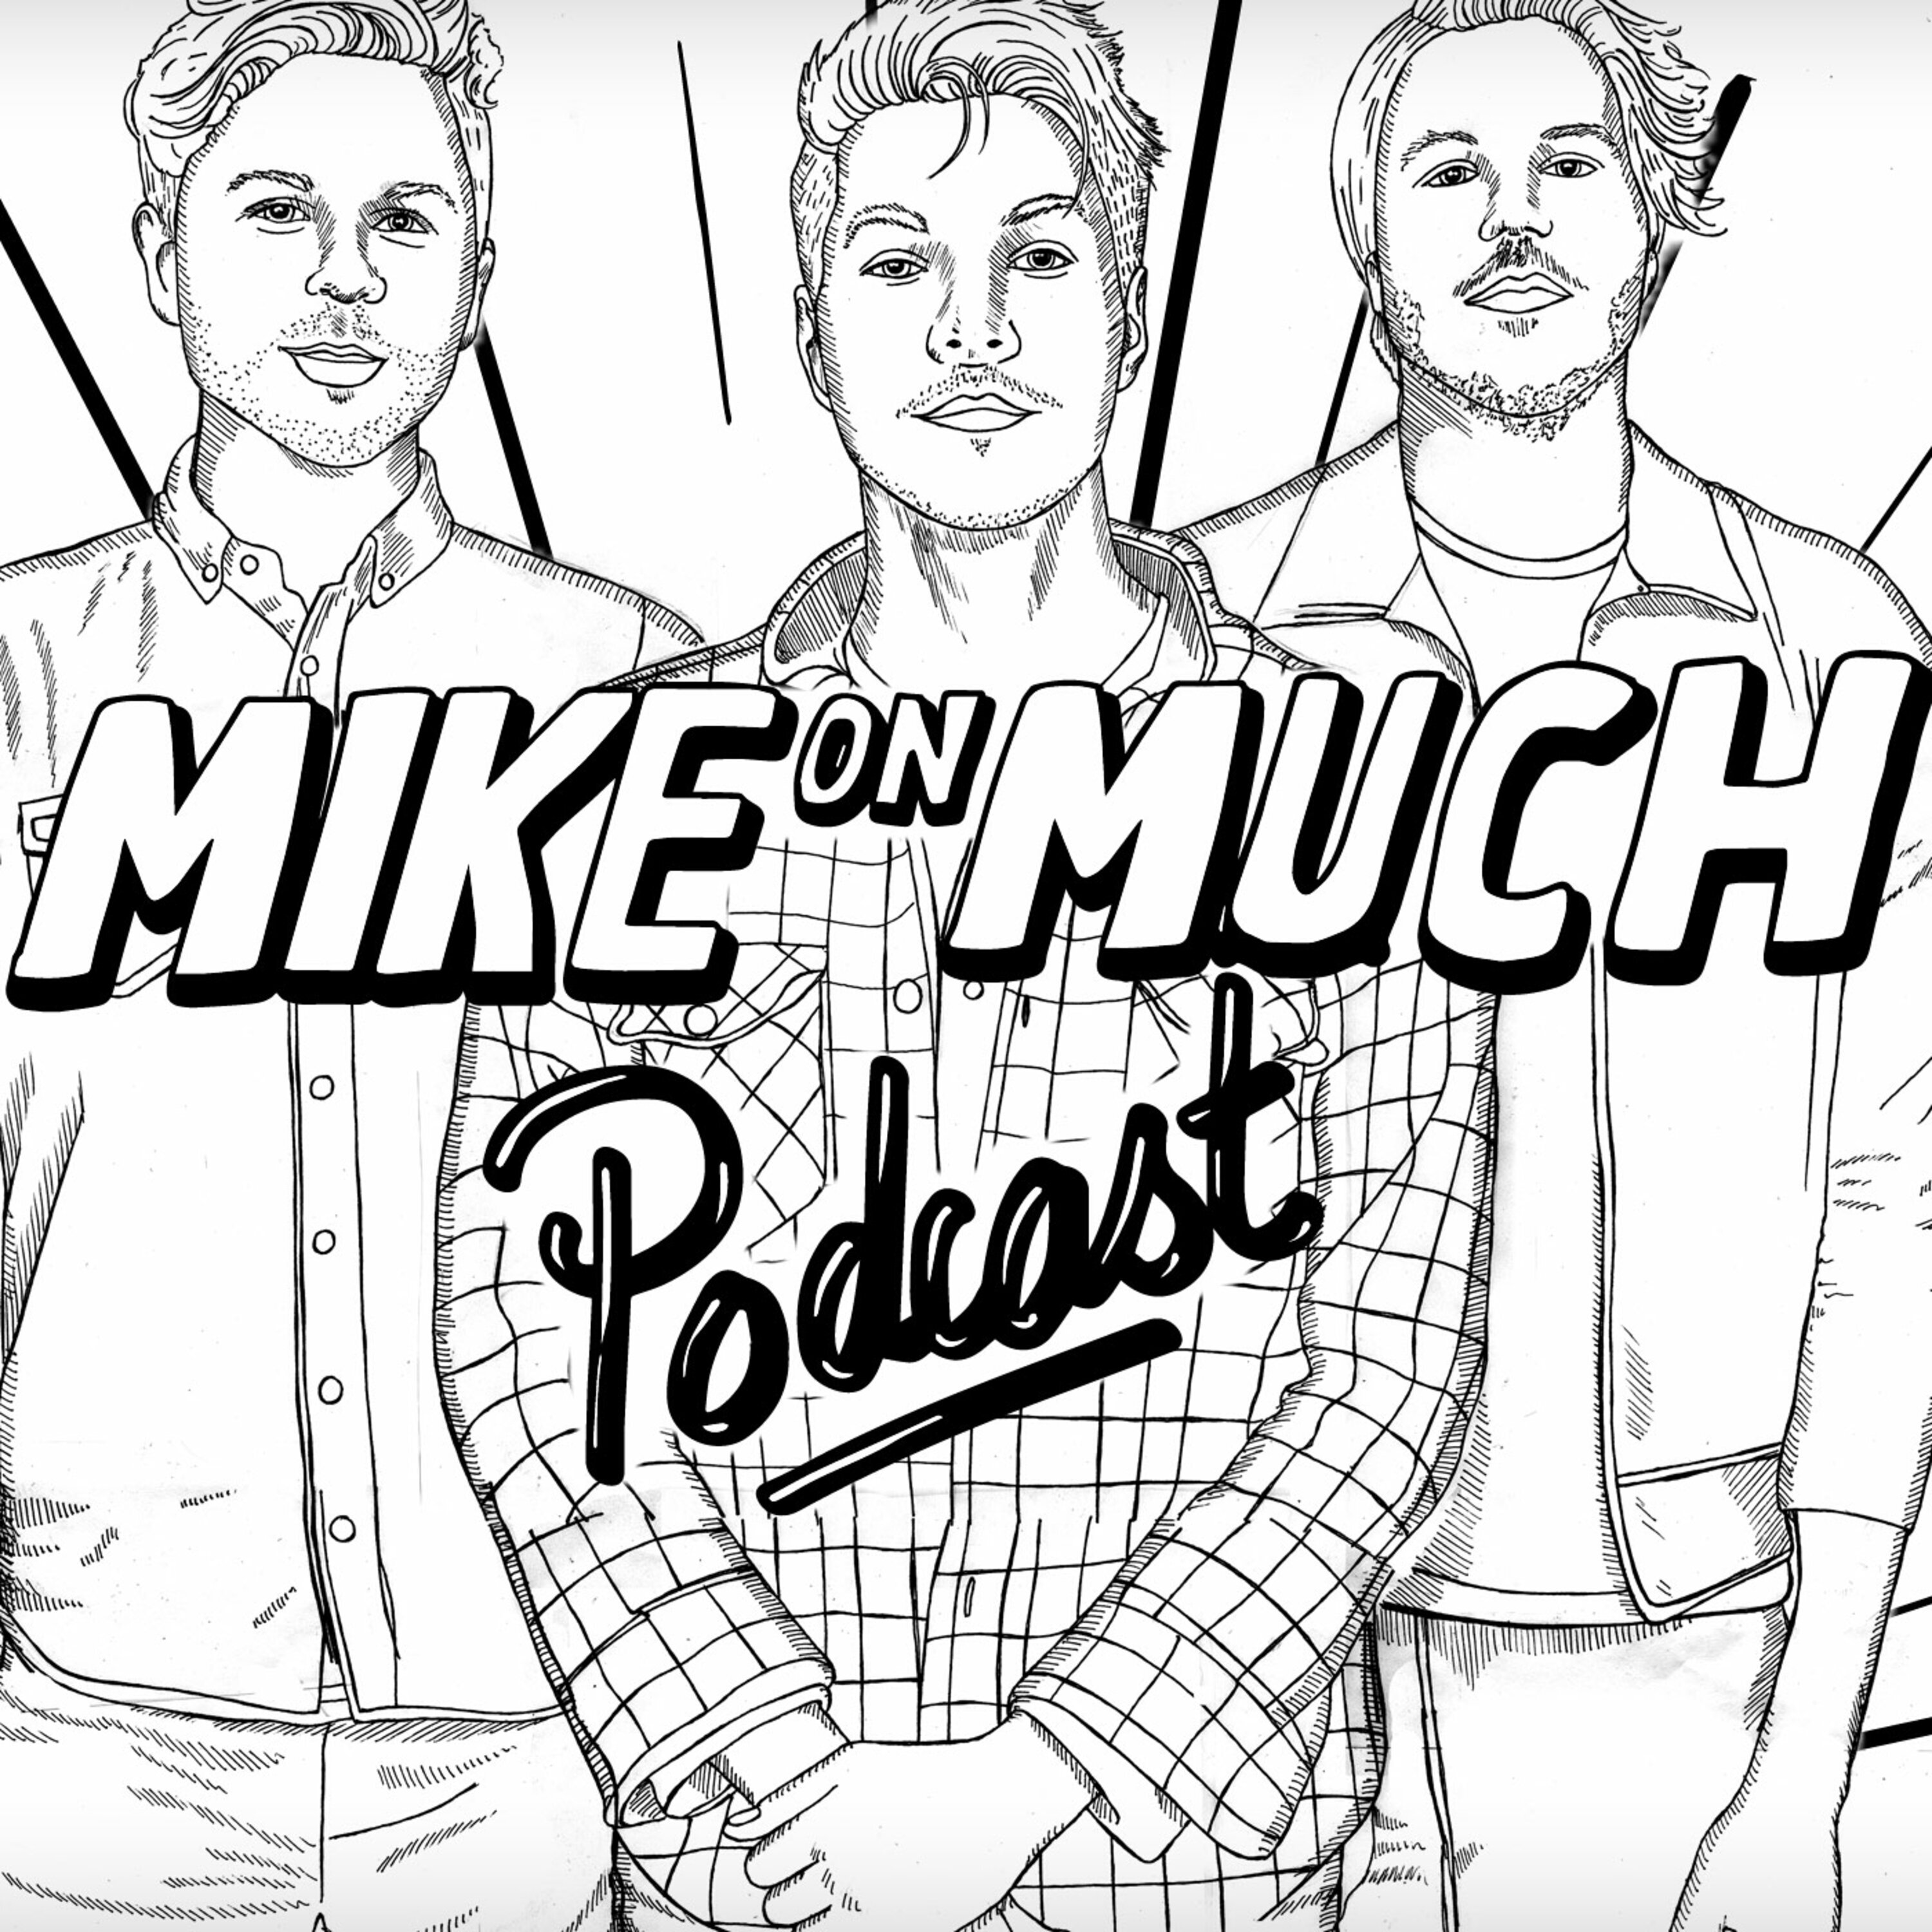 Season 1 Mike On Much: “Surprise!”